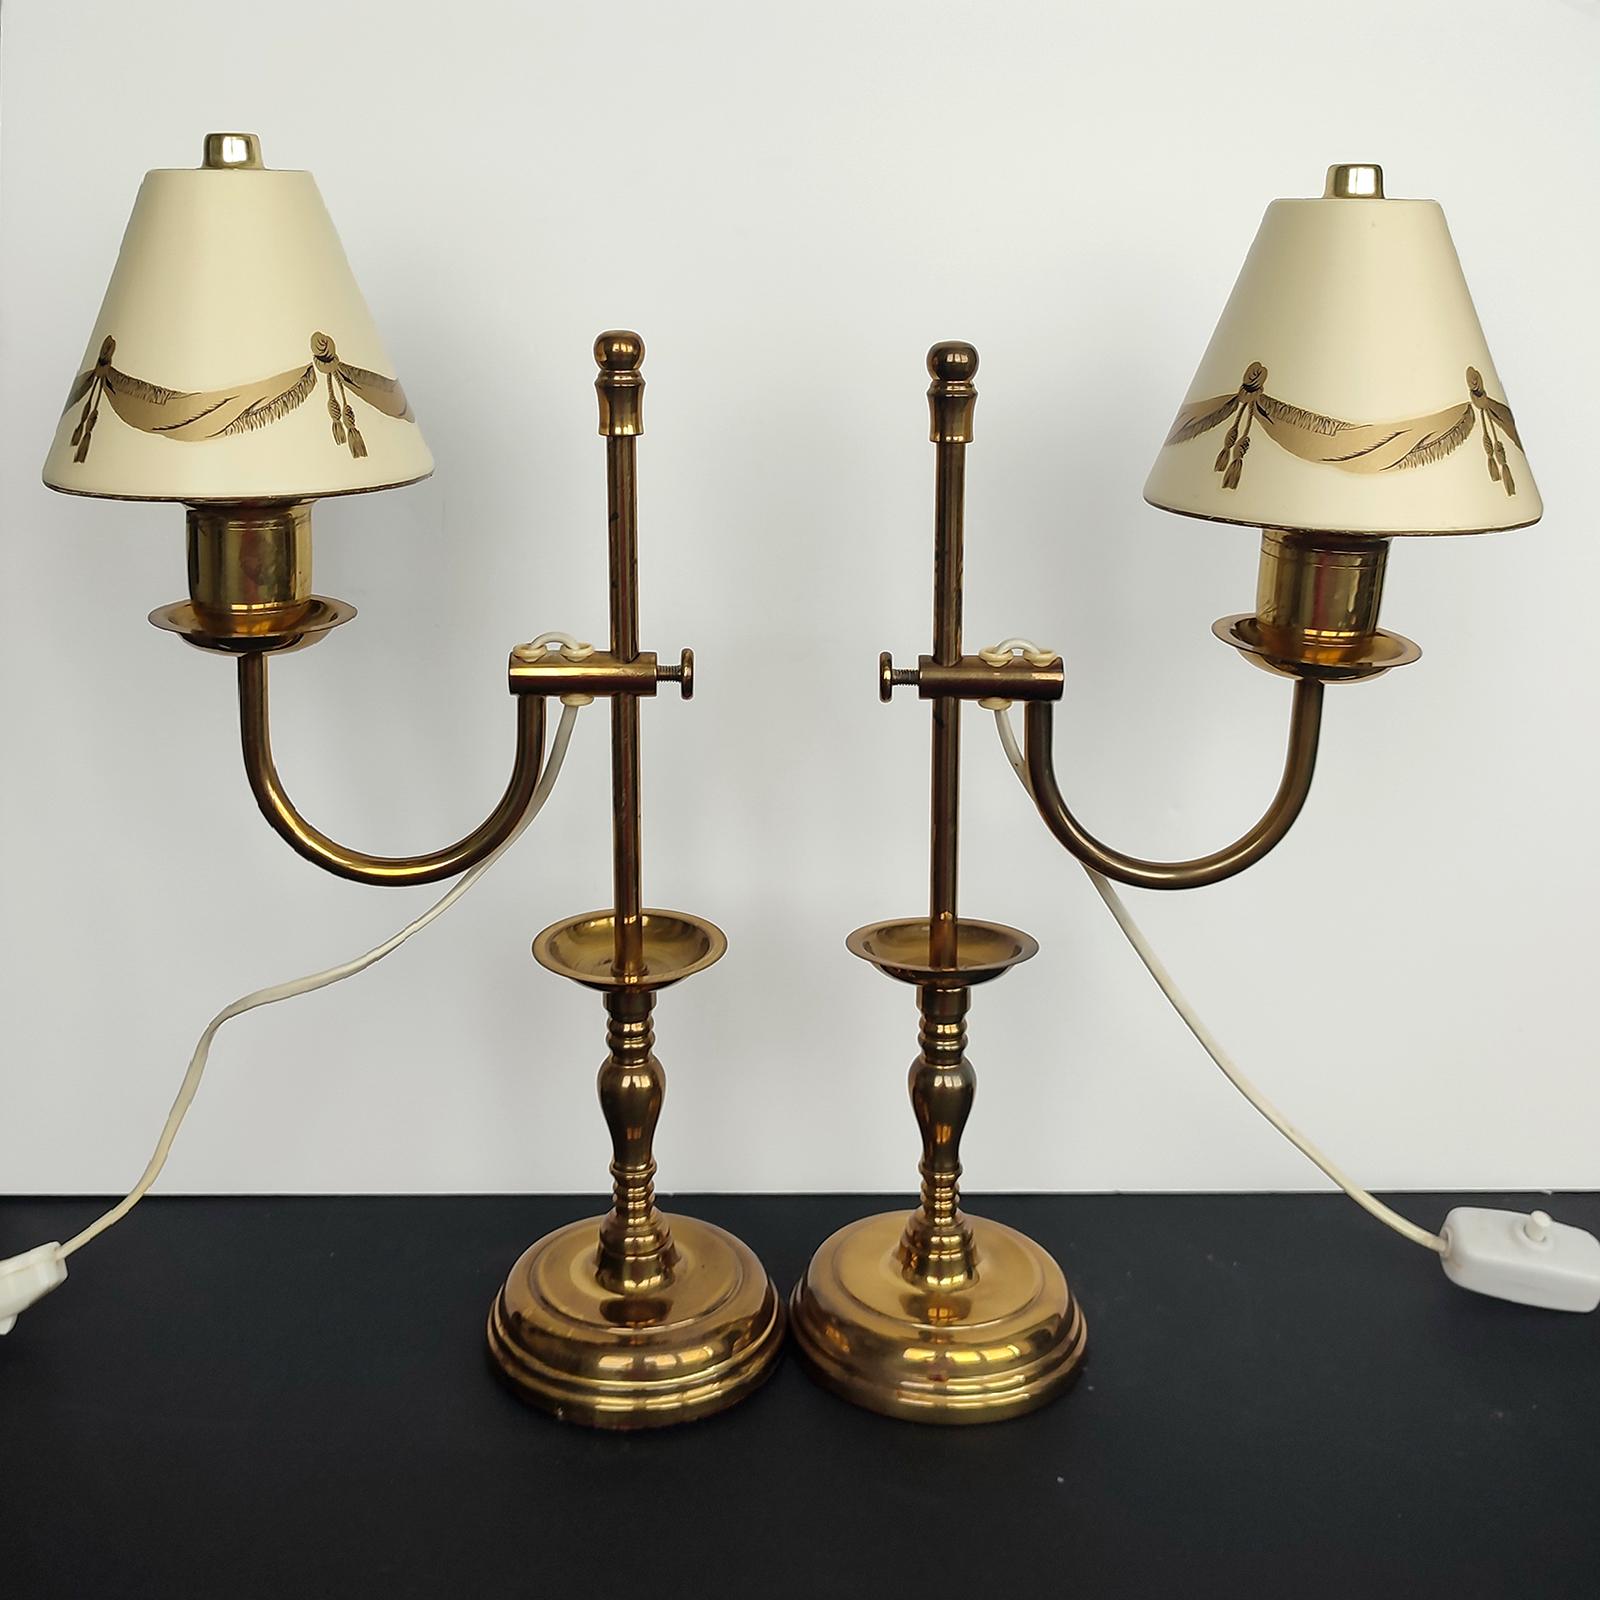 Neoclassical Pair of Gilt Bronze Bouillotte Lamps, France, Early 20th Century.
Shipping is complementary.
A great pair of side table lamps, heavy structure made of bronze, adjustable hand painted tole clip on shades. E27 light base, suitable for